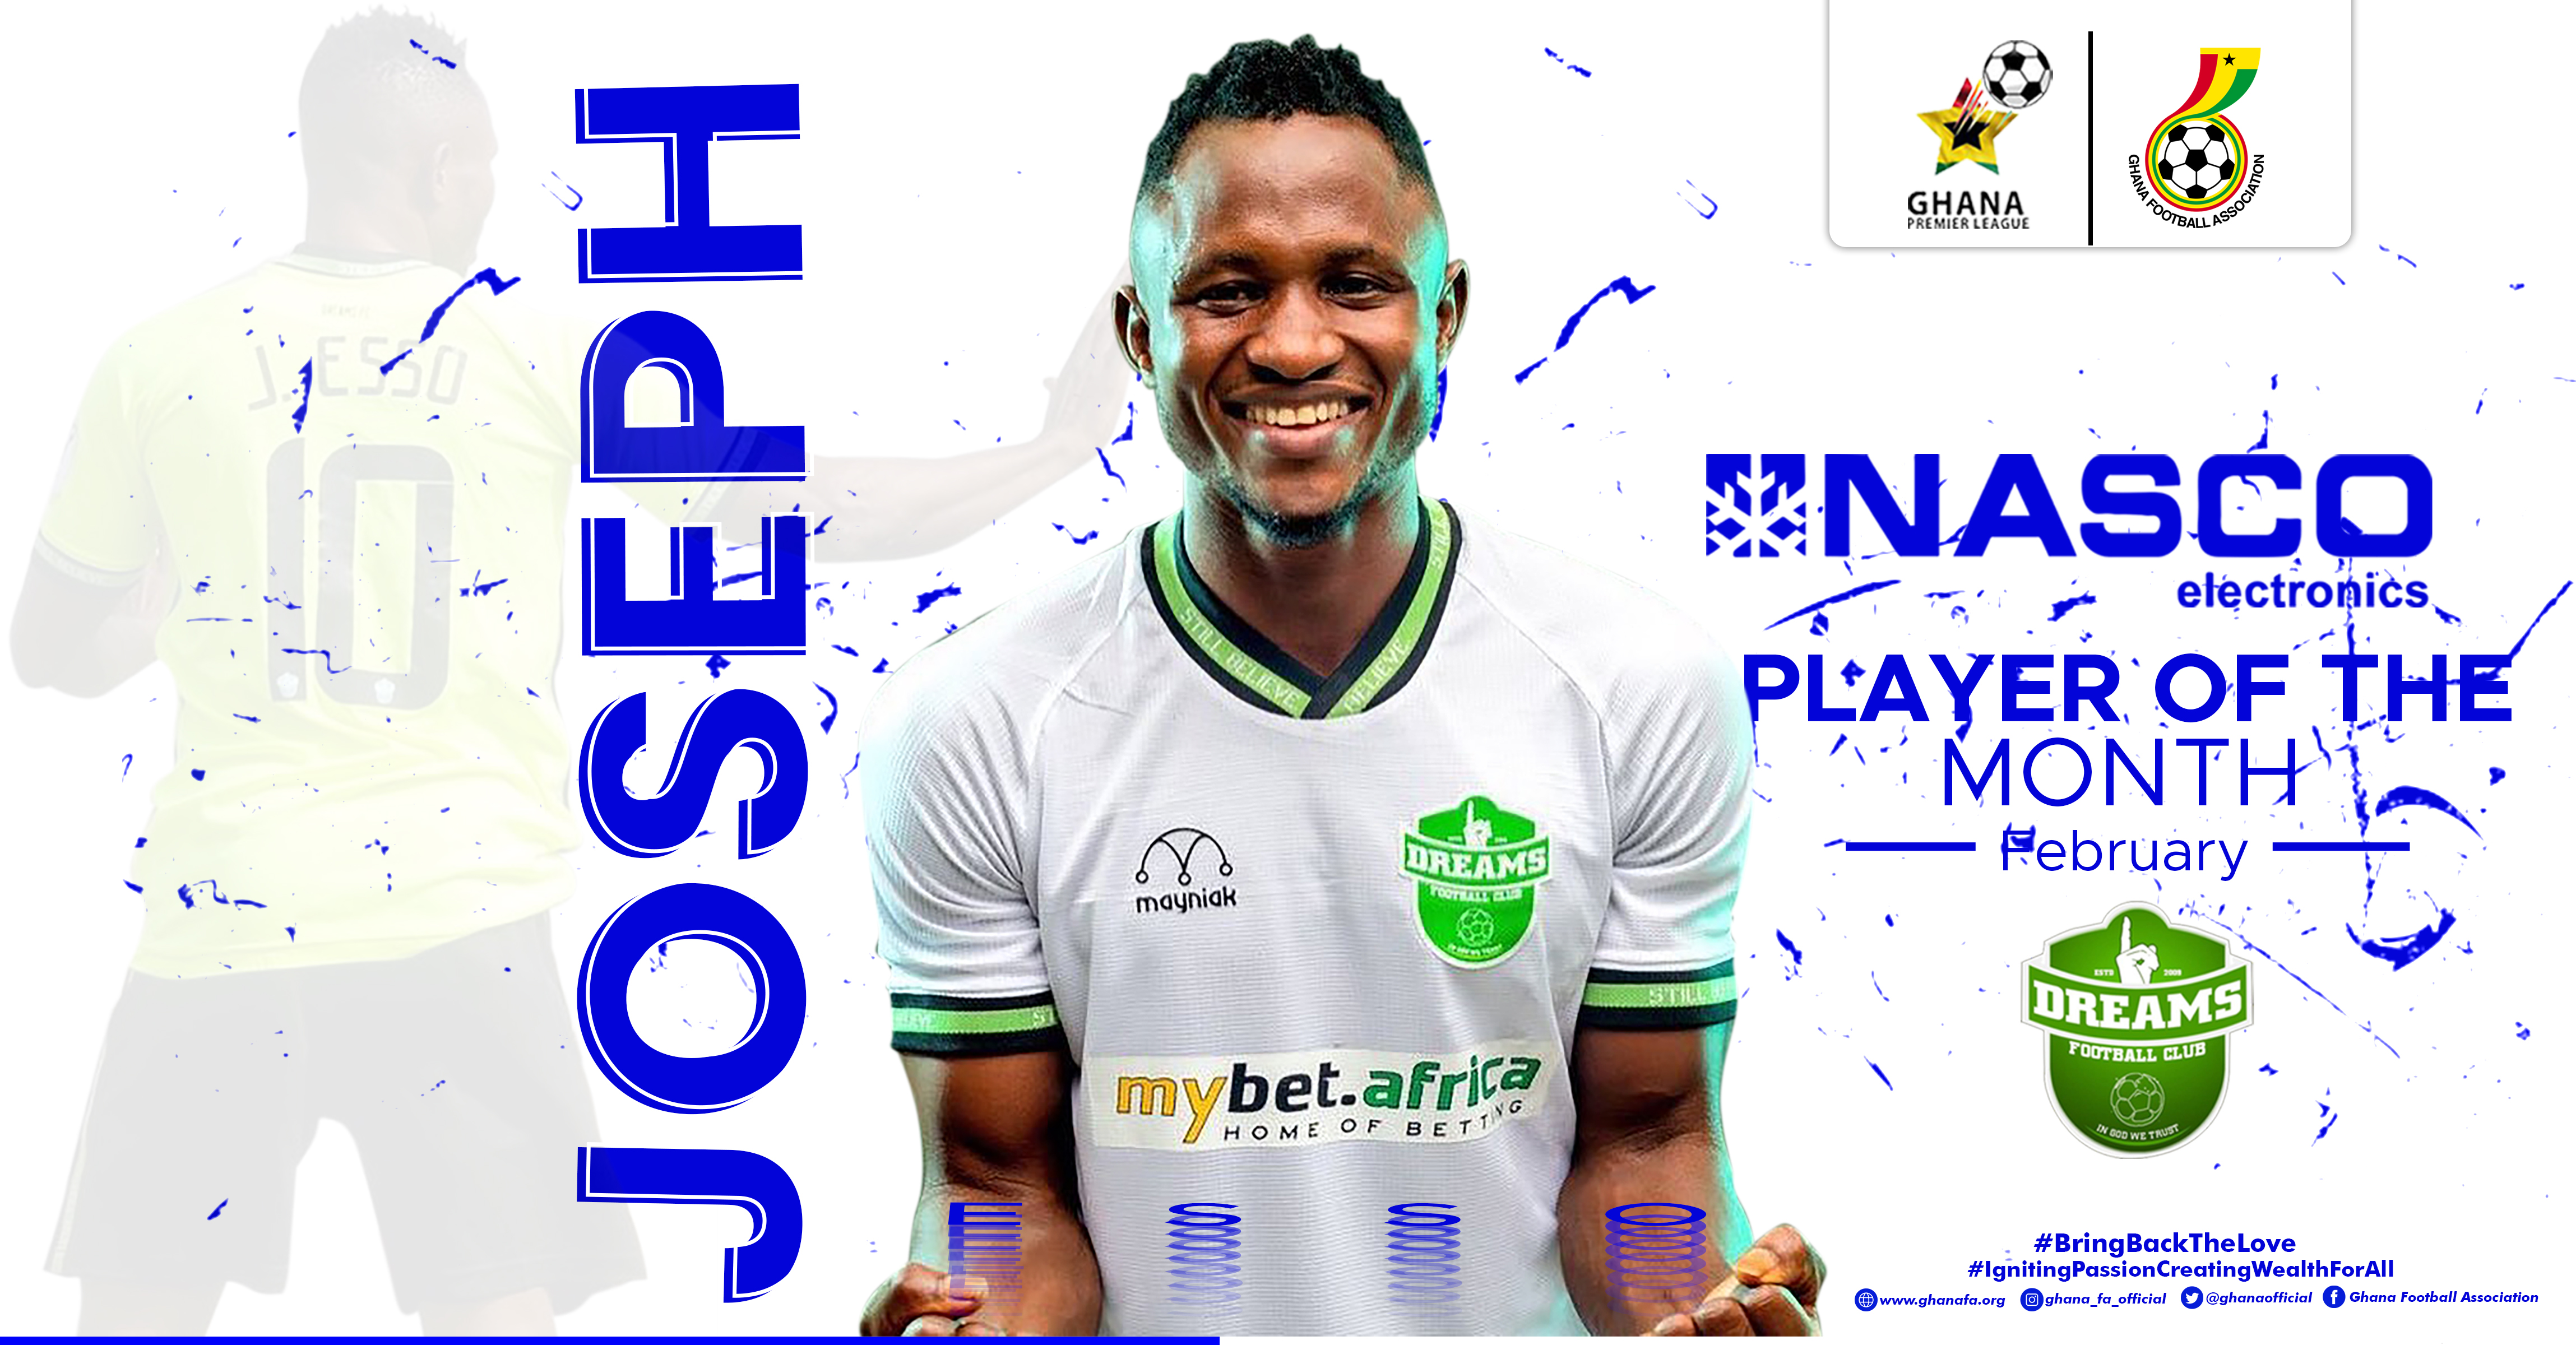 Esso wins February NASCO Player of the month